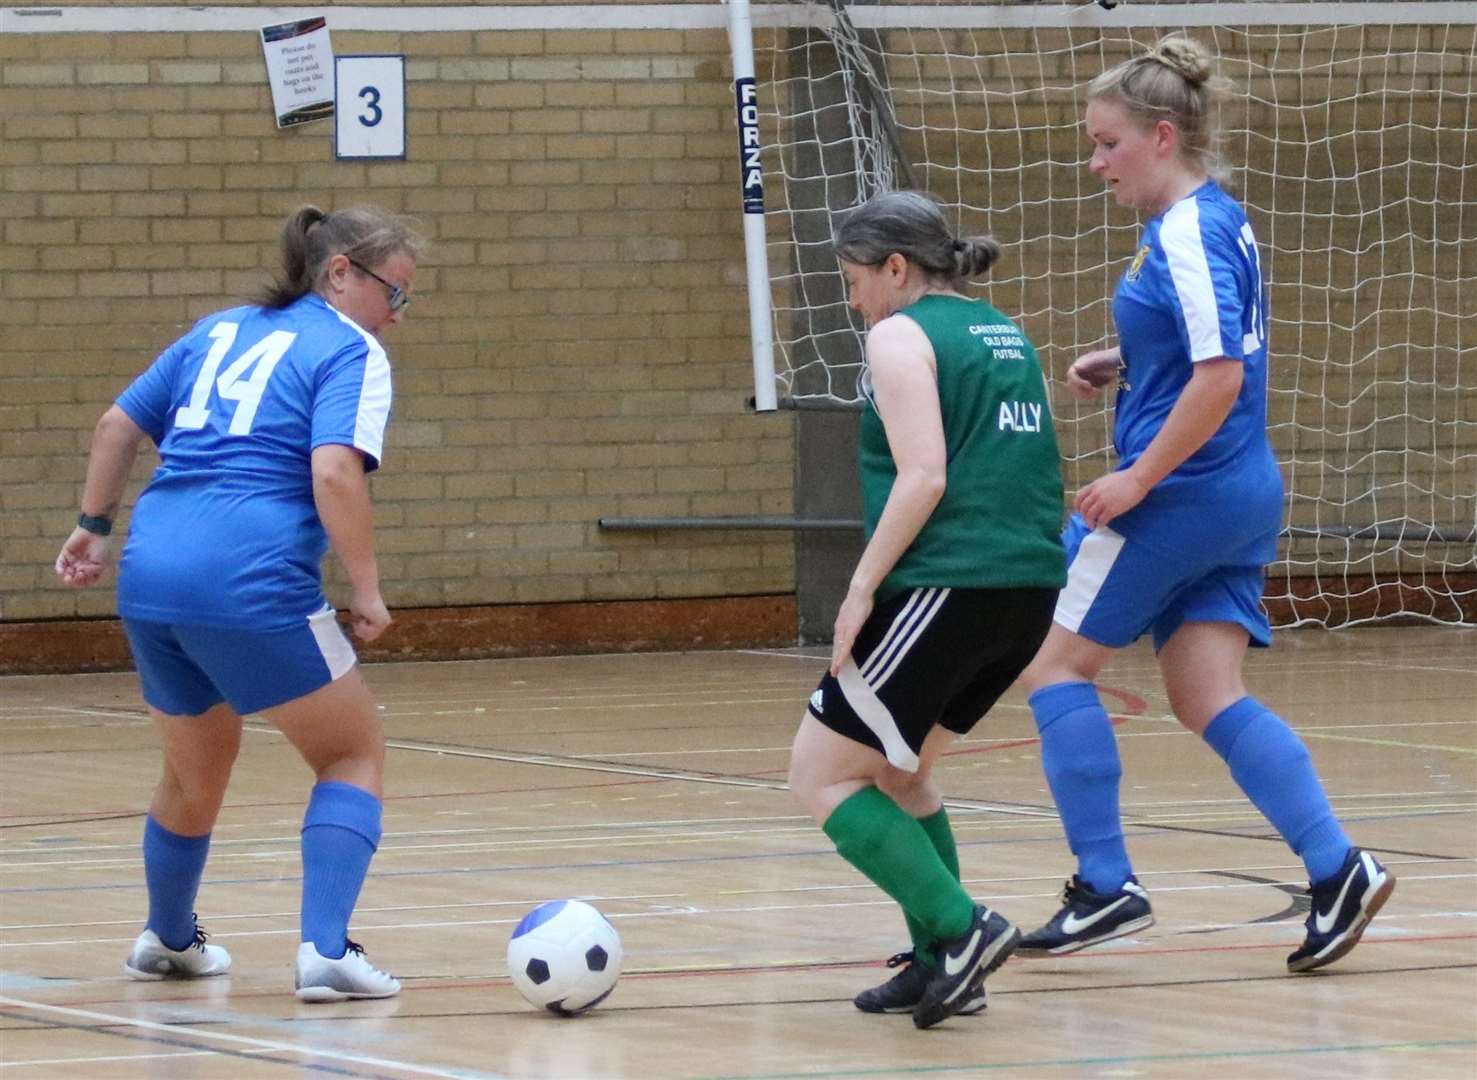 Women's Futsal Festival at Medway Park hosted by the Kent FA